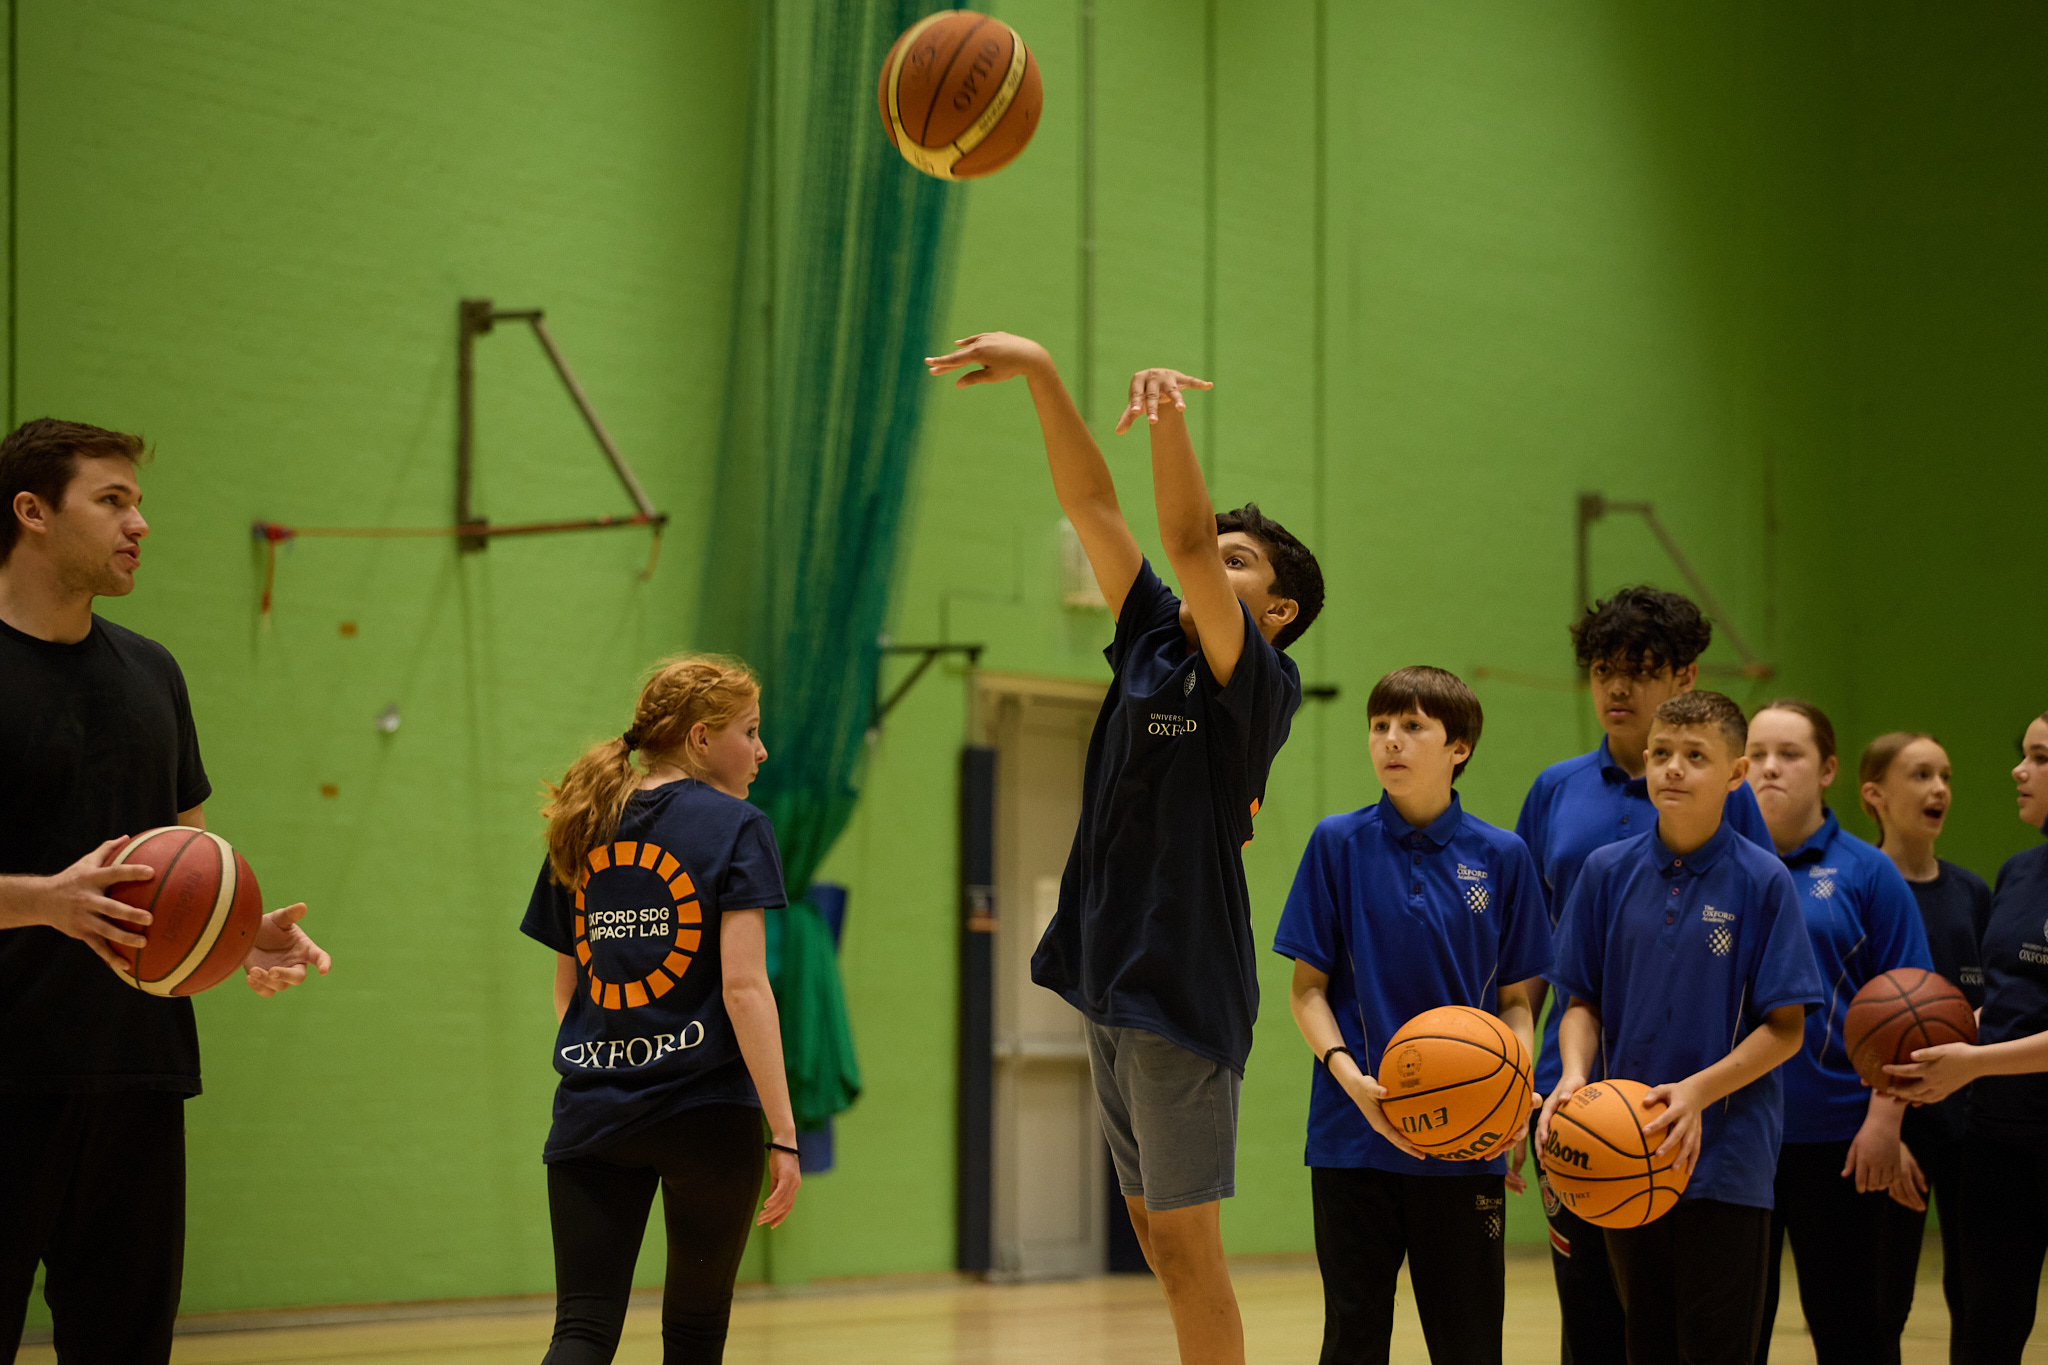 Pupil jumping up to shoot a hoop with queue waiting for their turn